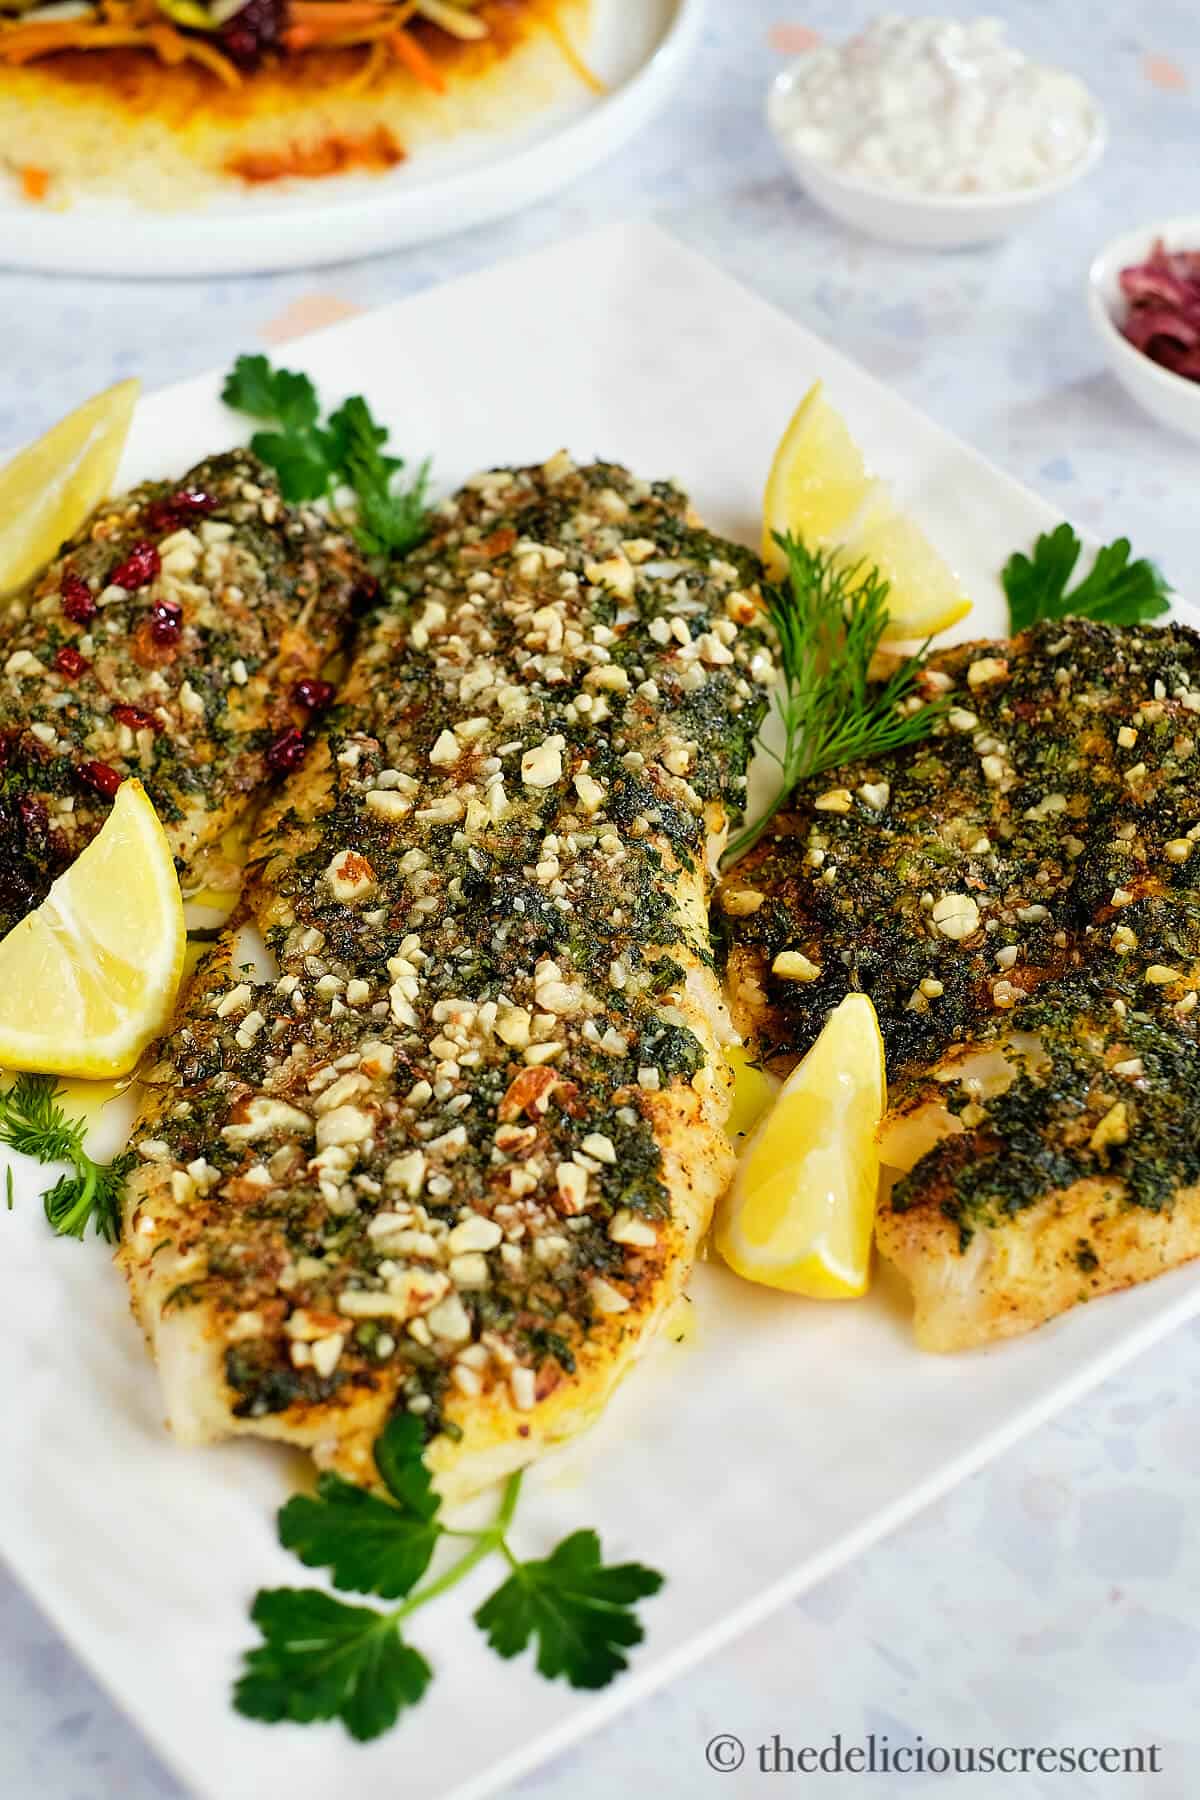 Almond crusted fish fillet in a white plate.